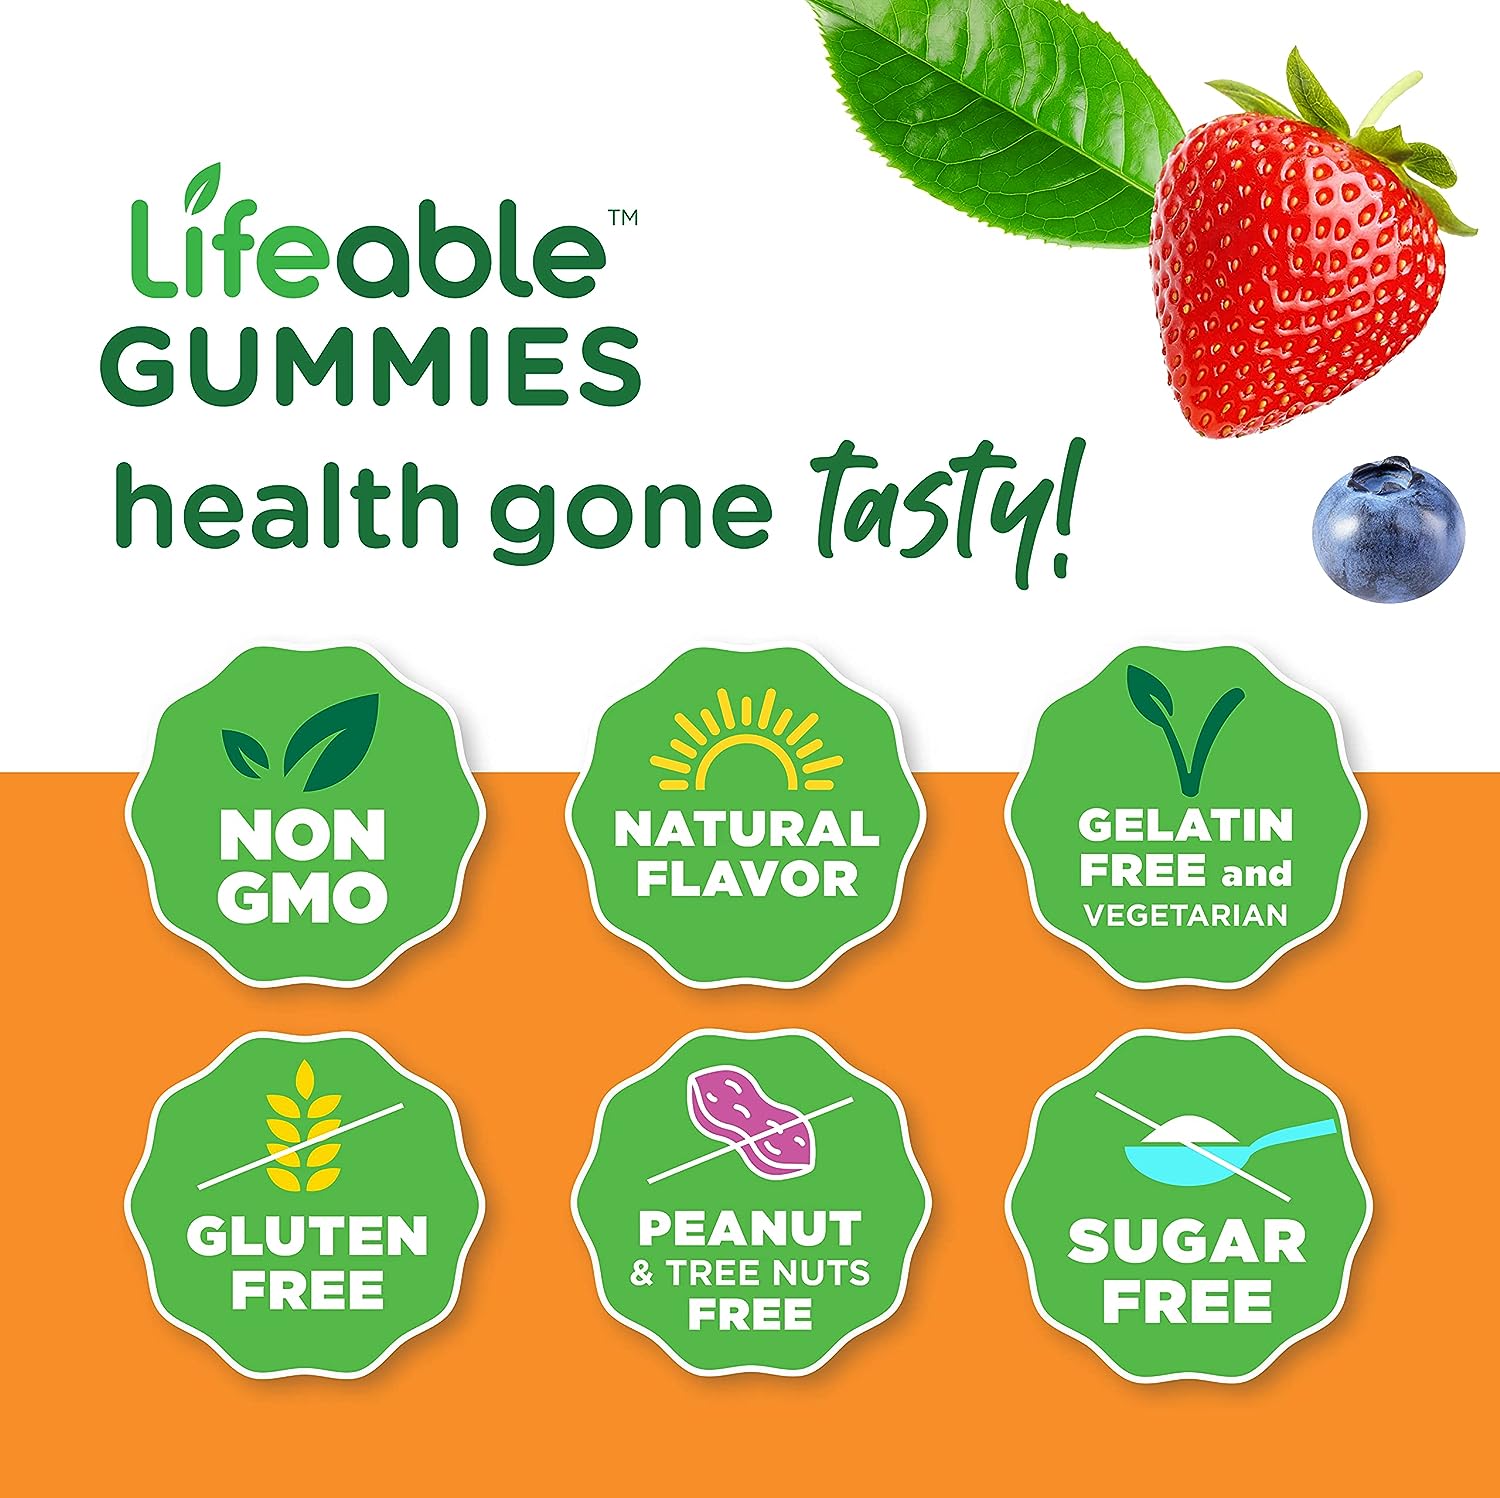 Lifeable Sugar Free Prebiotics Fiber for Adults - 4g - Great Tasting Natural Flavored Gummy Supplement - Keto Friendly - Gluten Free, Vegetarian, GMO Free - for Gut and Digestive Health - 90 Gummies : Health & Household